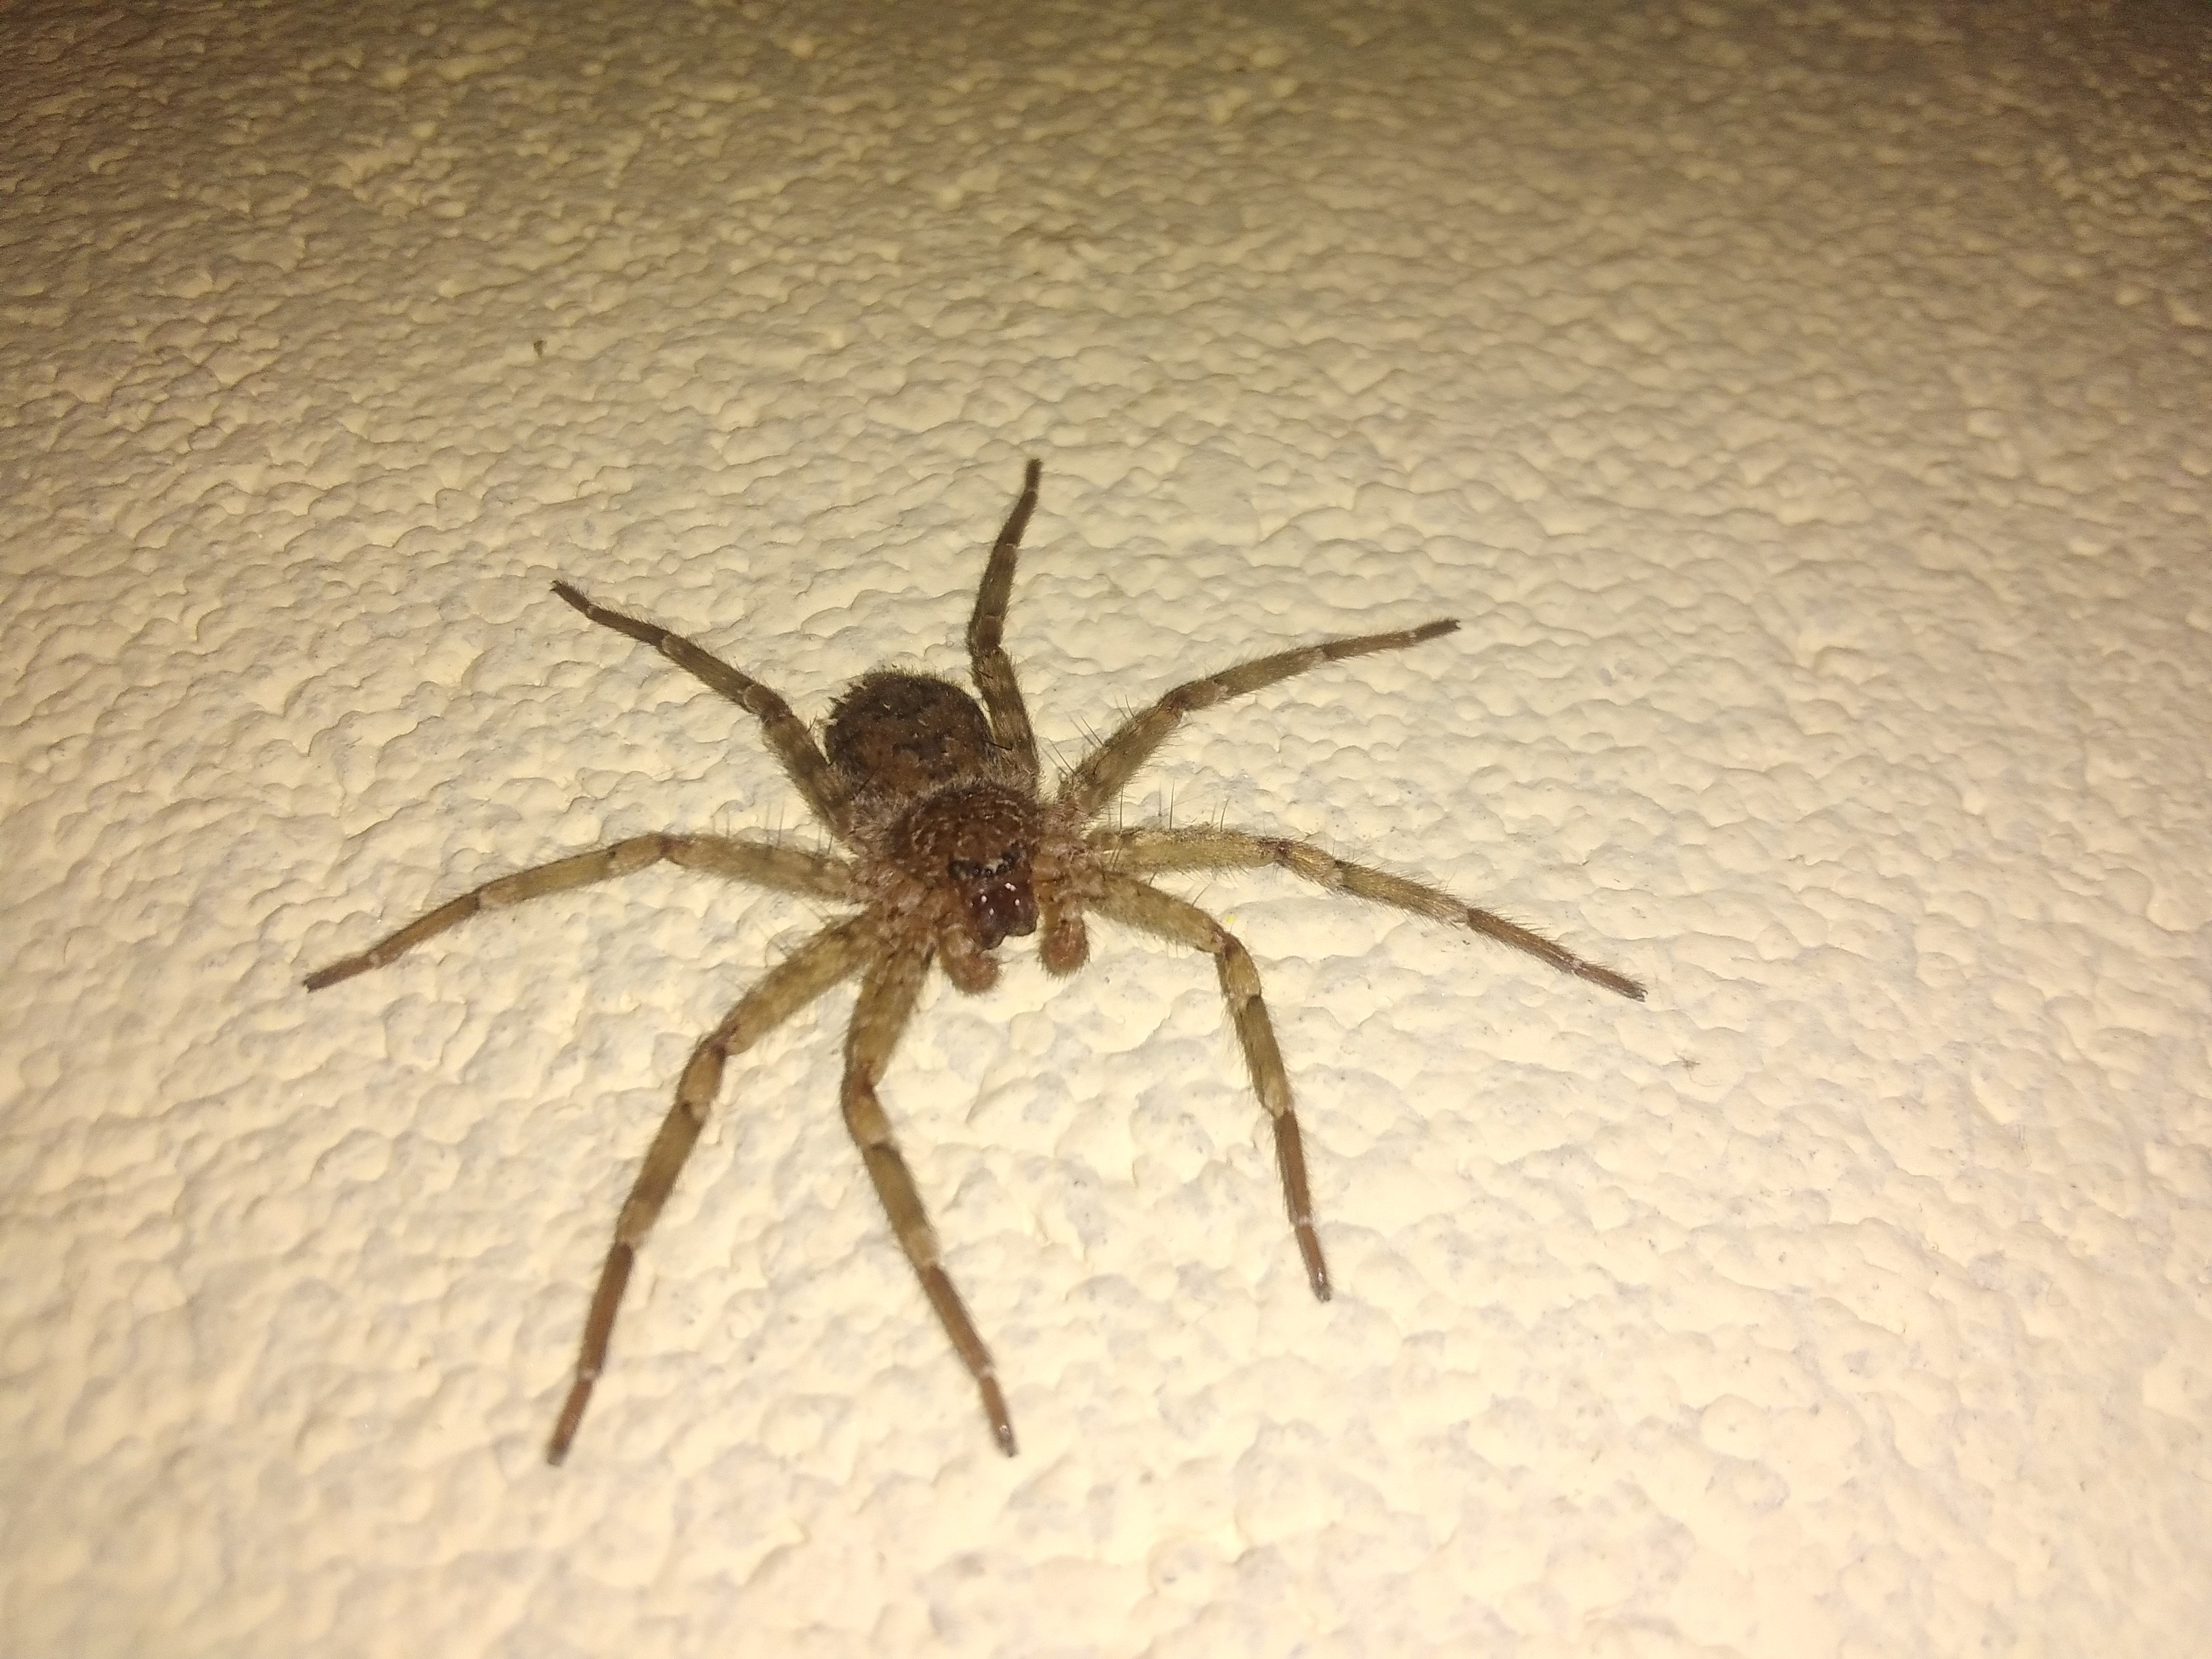 Wall Spider